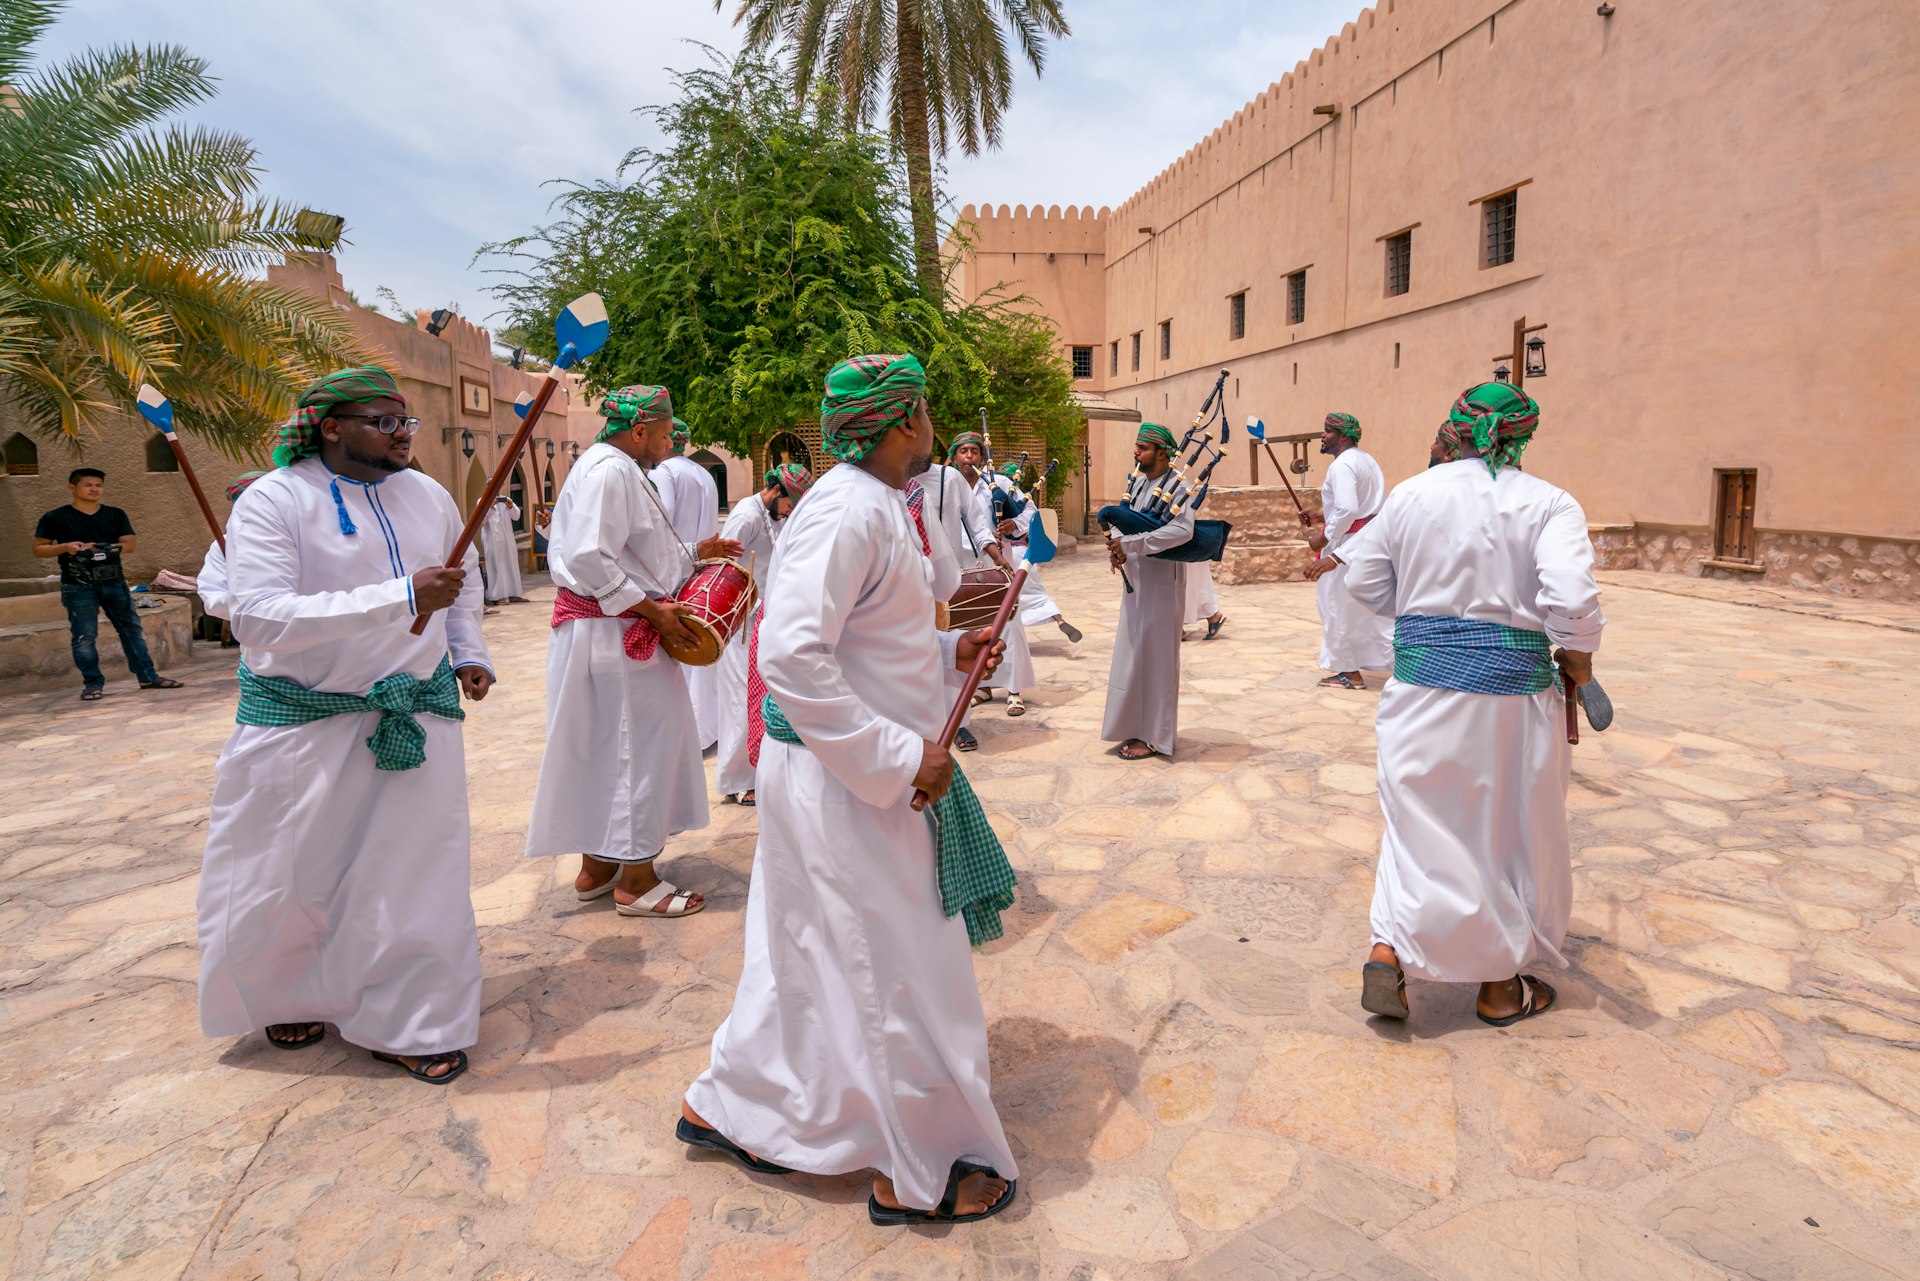 Men in traditional dress playing pipes, singing and dancing around in a ceremony, Nizwa, Oman